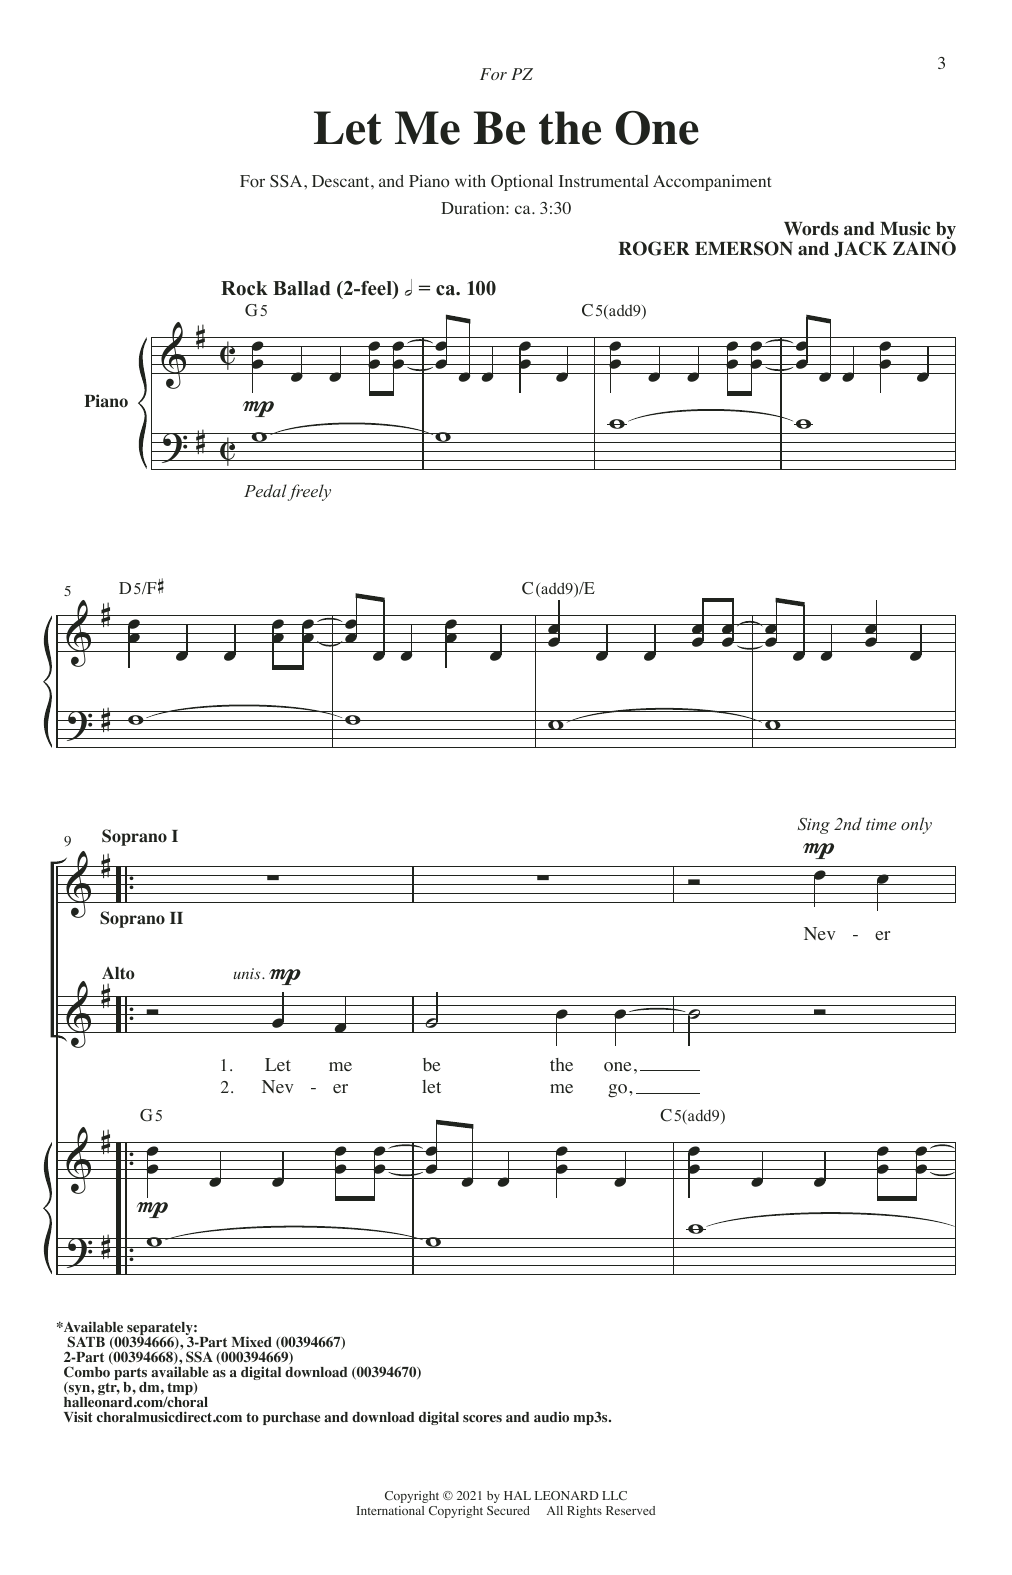 Download Roger Emerson & Jack Zaino Let Me Be The One Sheet Music